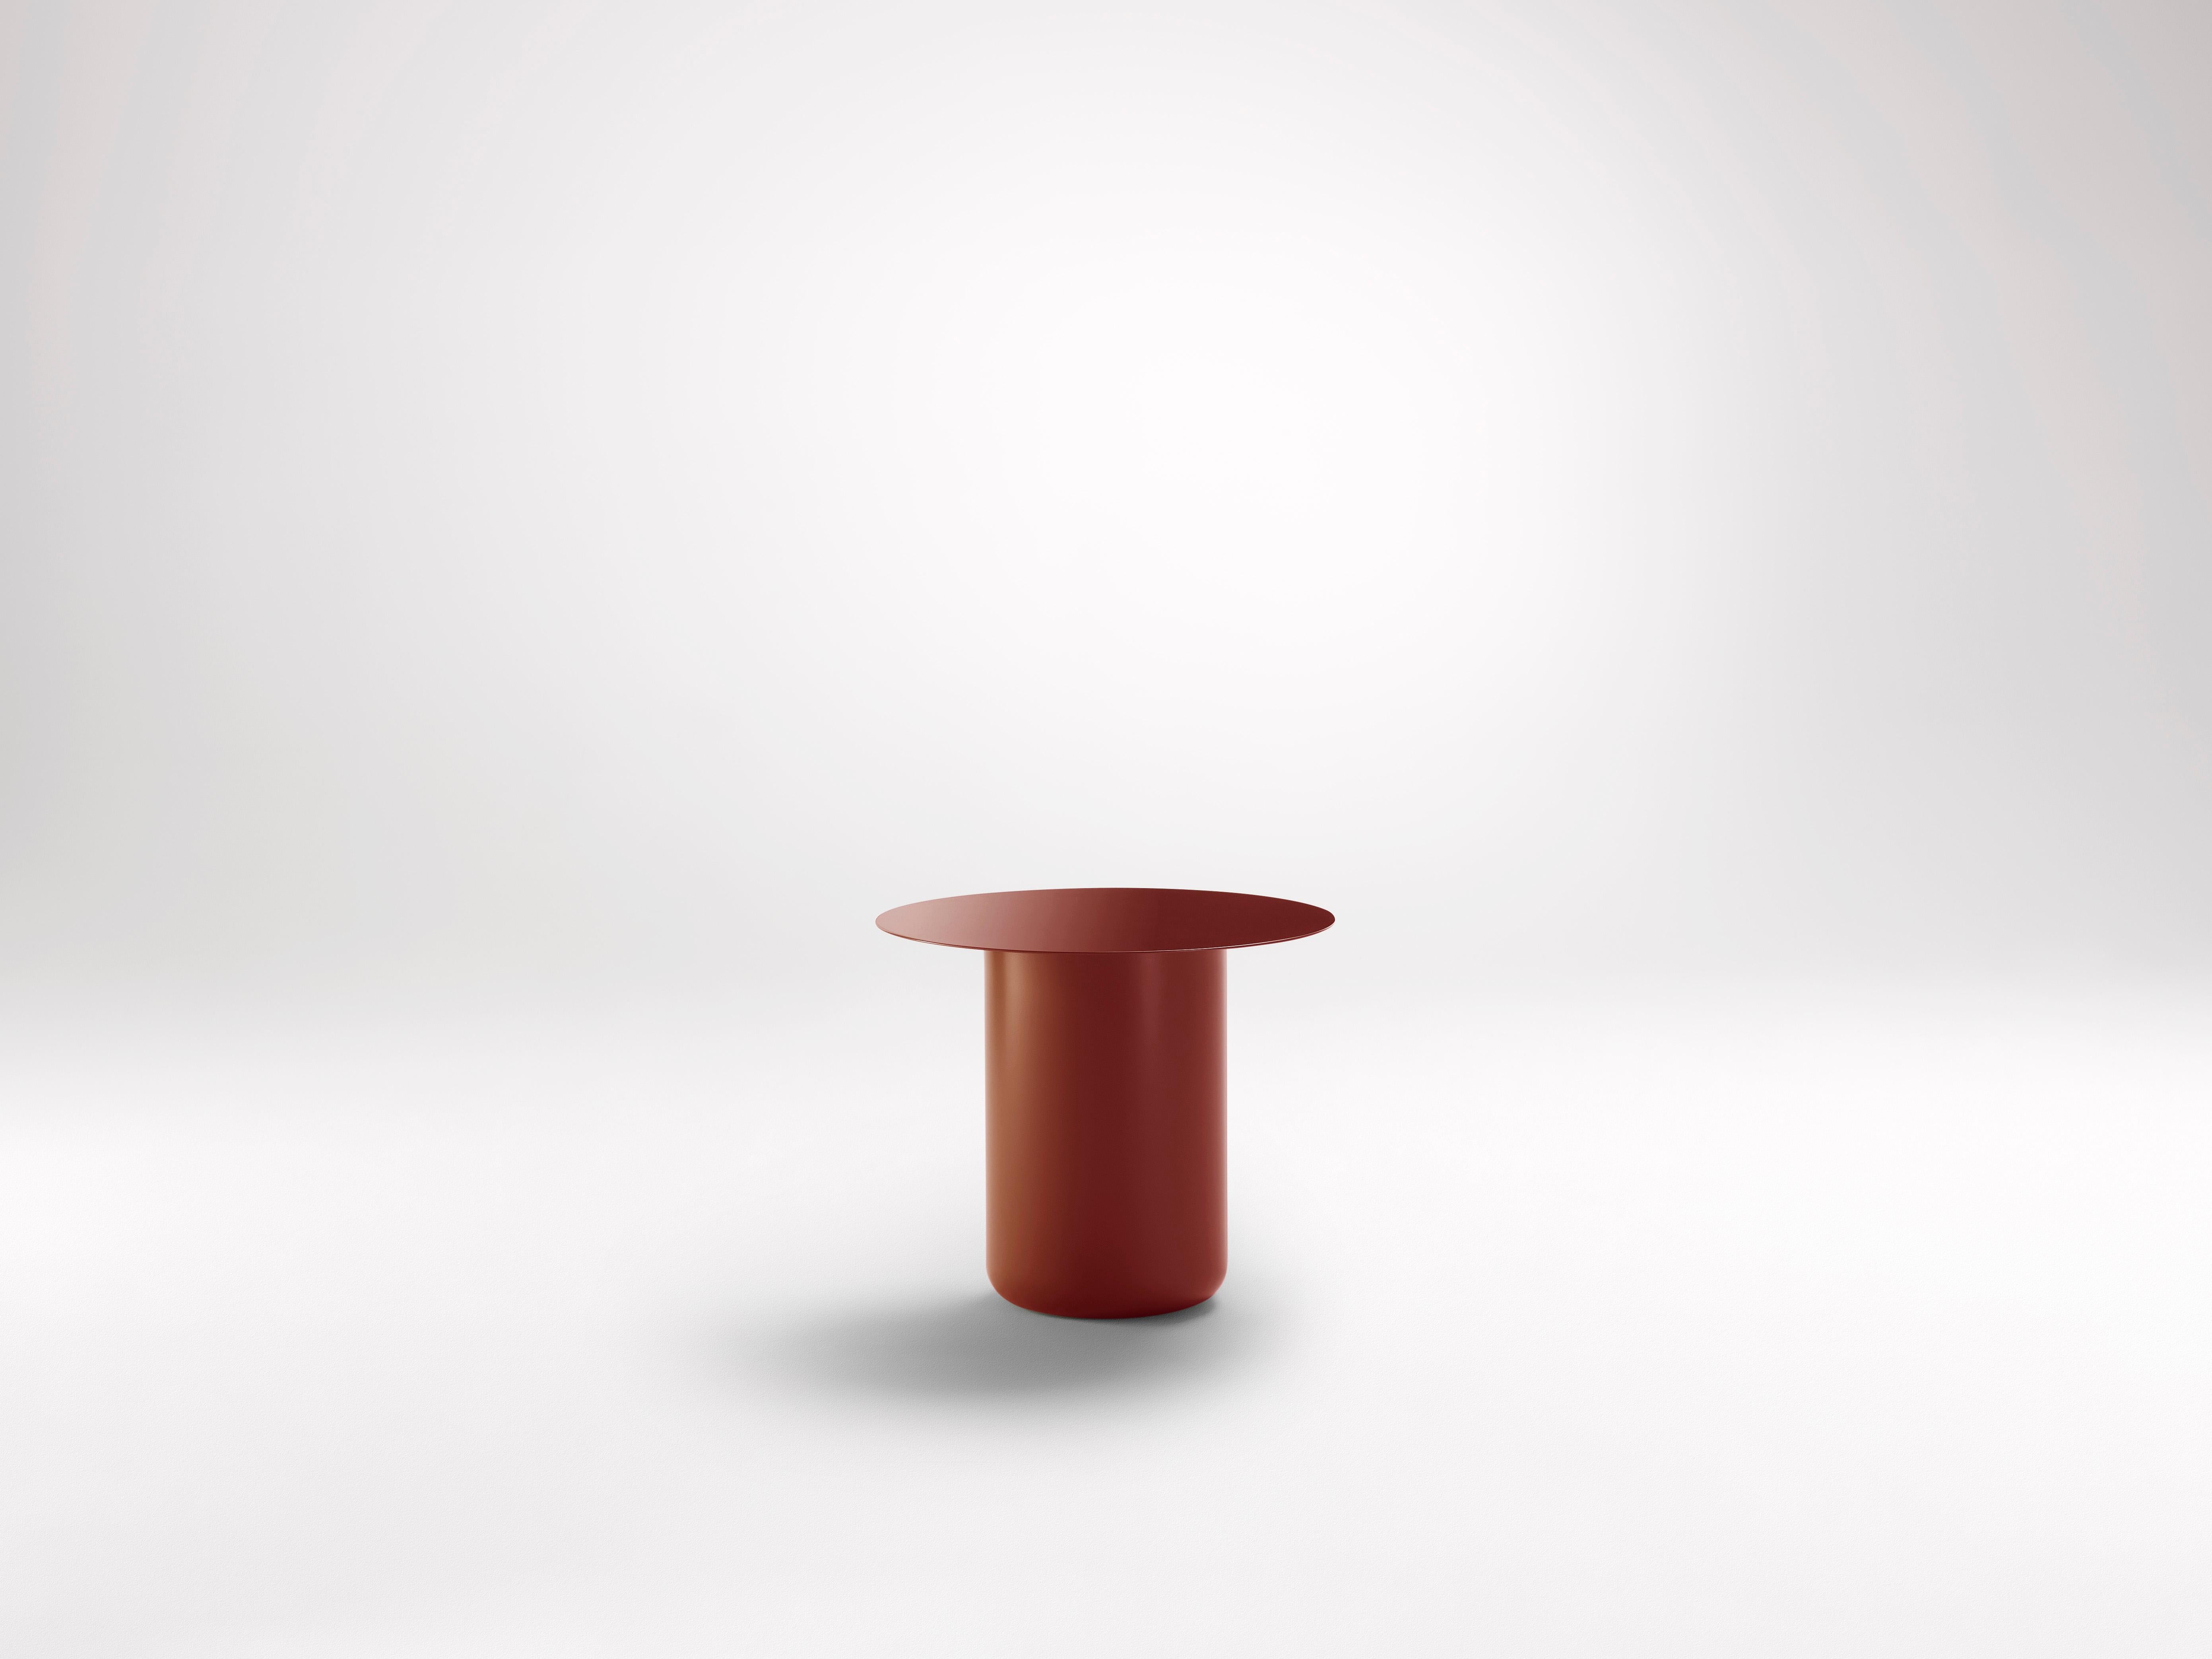 Headland Red Table 01 by Coco Flip
Dimensions: D 48 x W 48 x H 32 / 36 / 40 / 42 cm
Materials: Mild steel, powder-coated with zinc undercoat. 
Weight: 12kg

Coco Flip is a Melbourne based furniture and lighting design studio, run by us, Kate Stokes